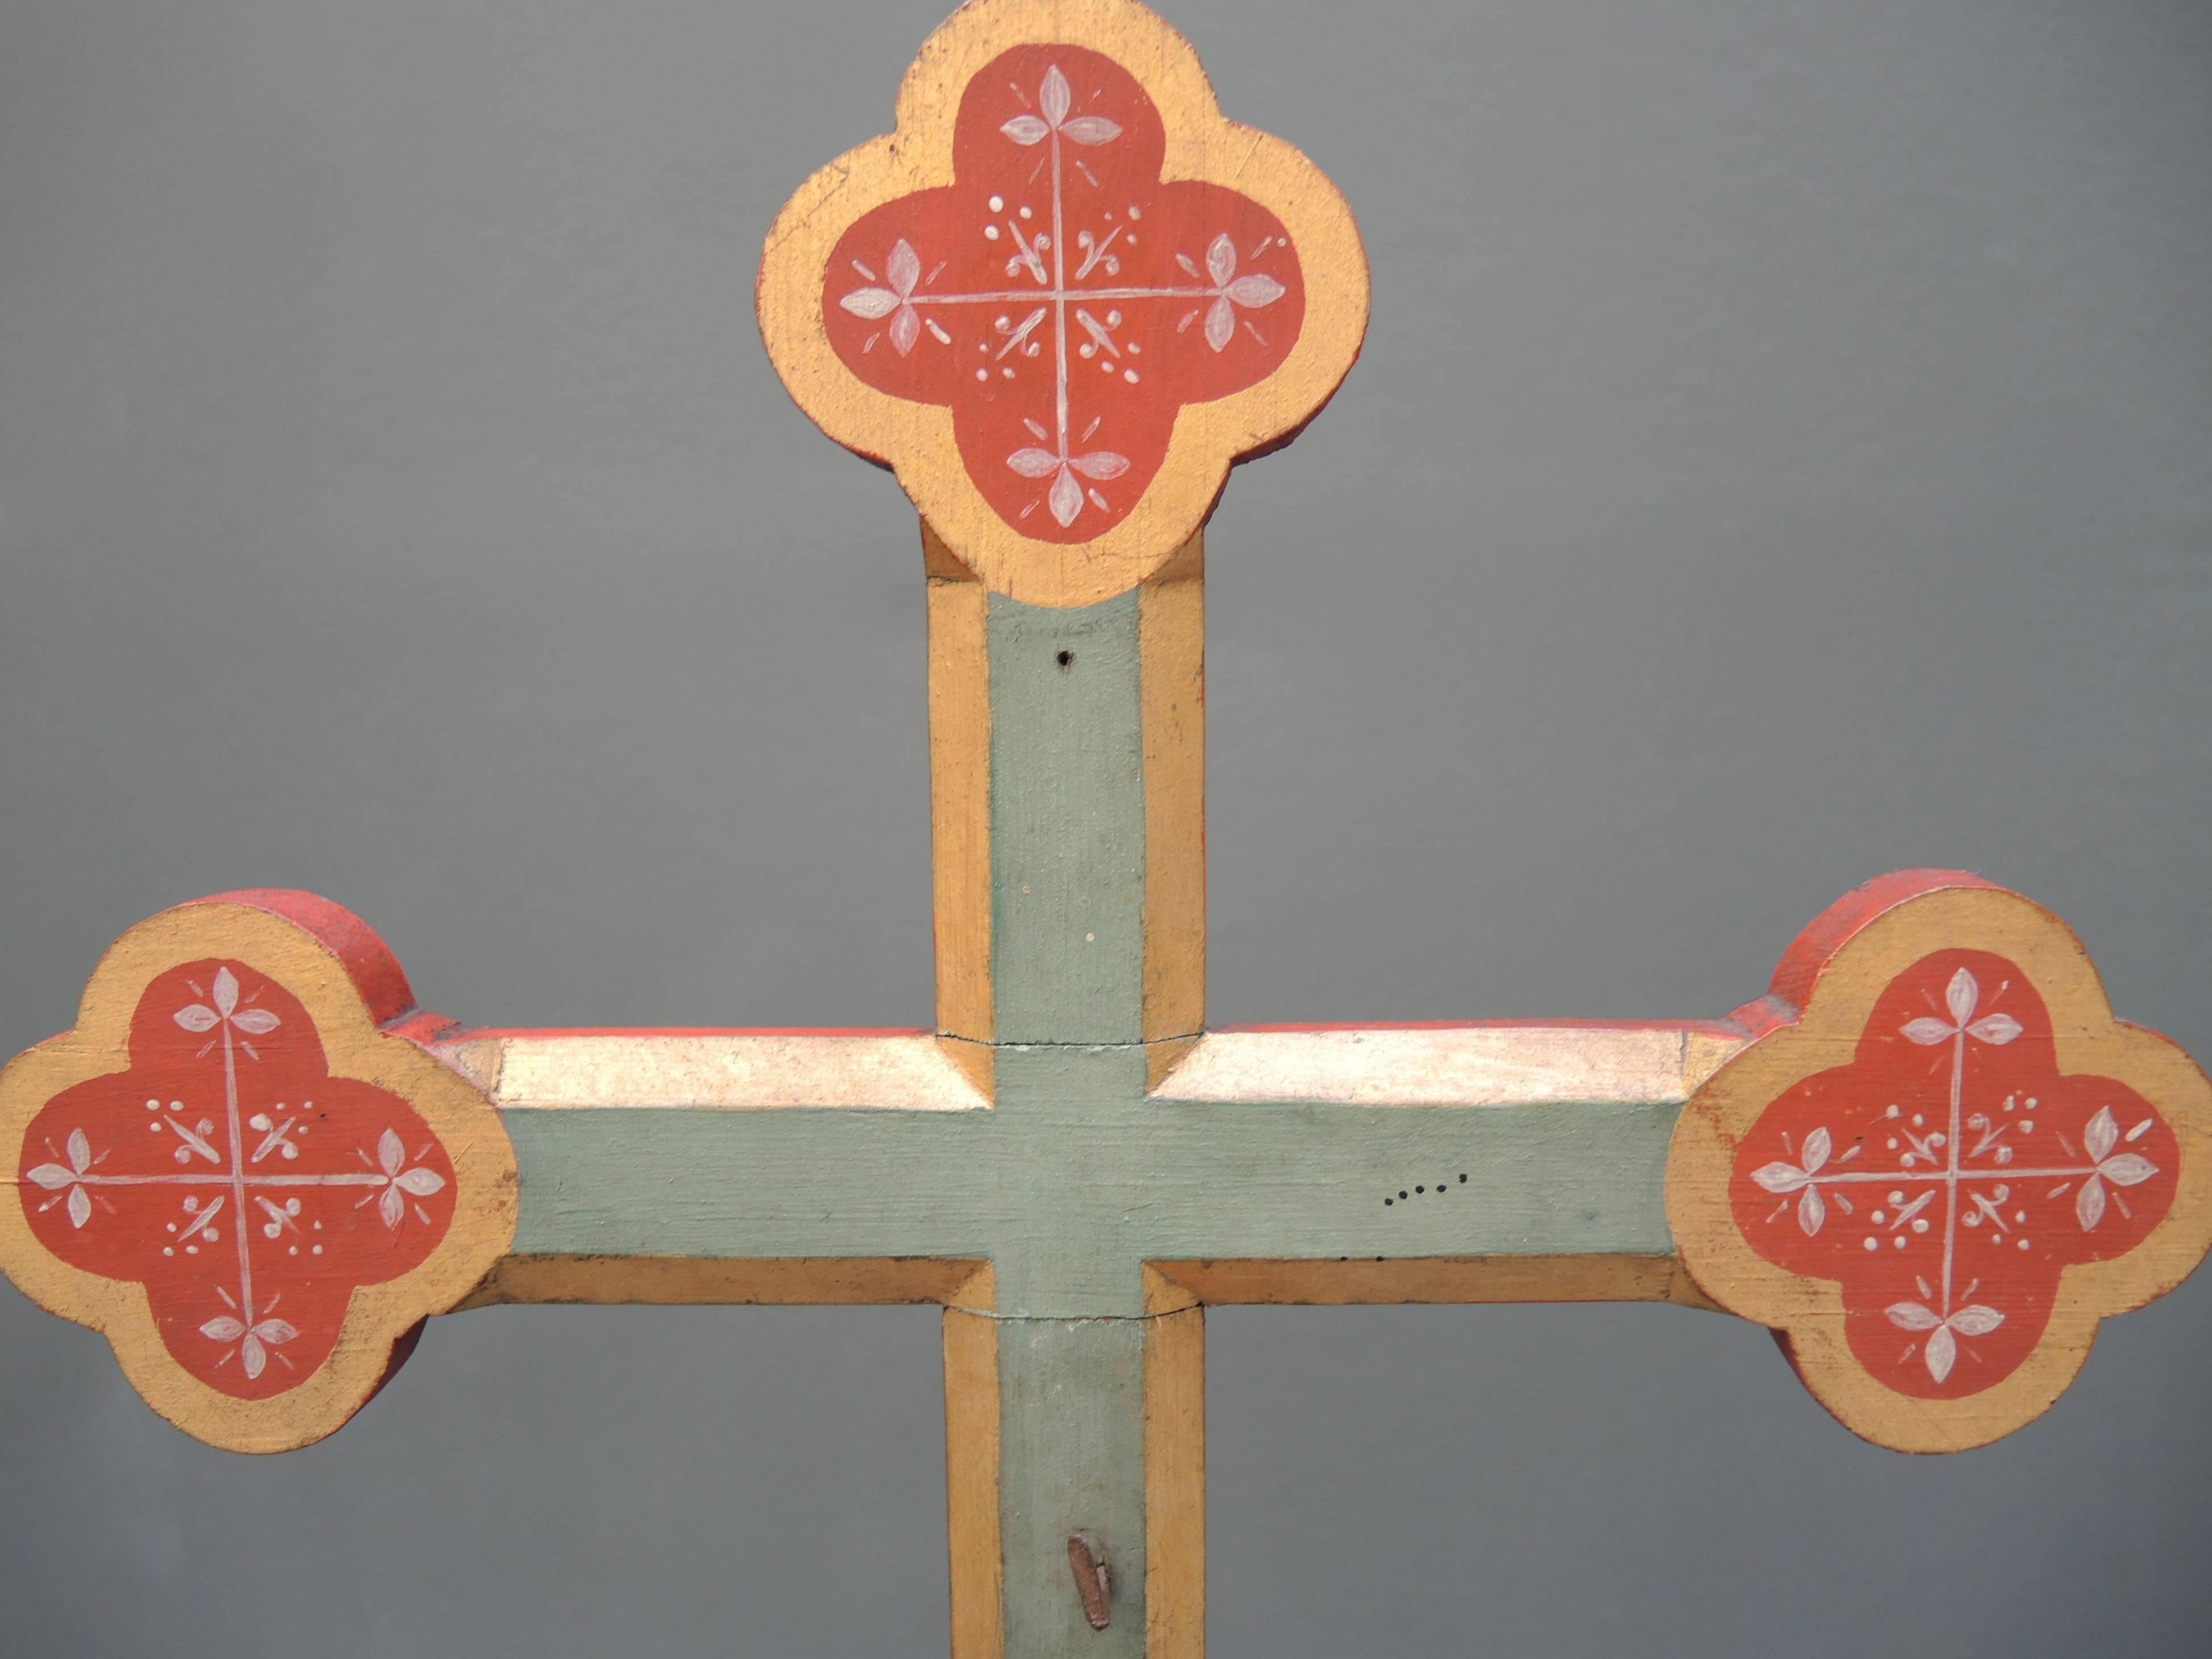 19th century Lithuanian painted pine cross retaining the original red, green and gold paint.
A lovely and colorful centrepiece.